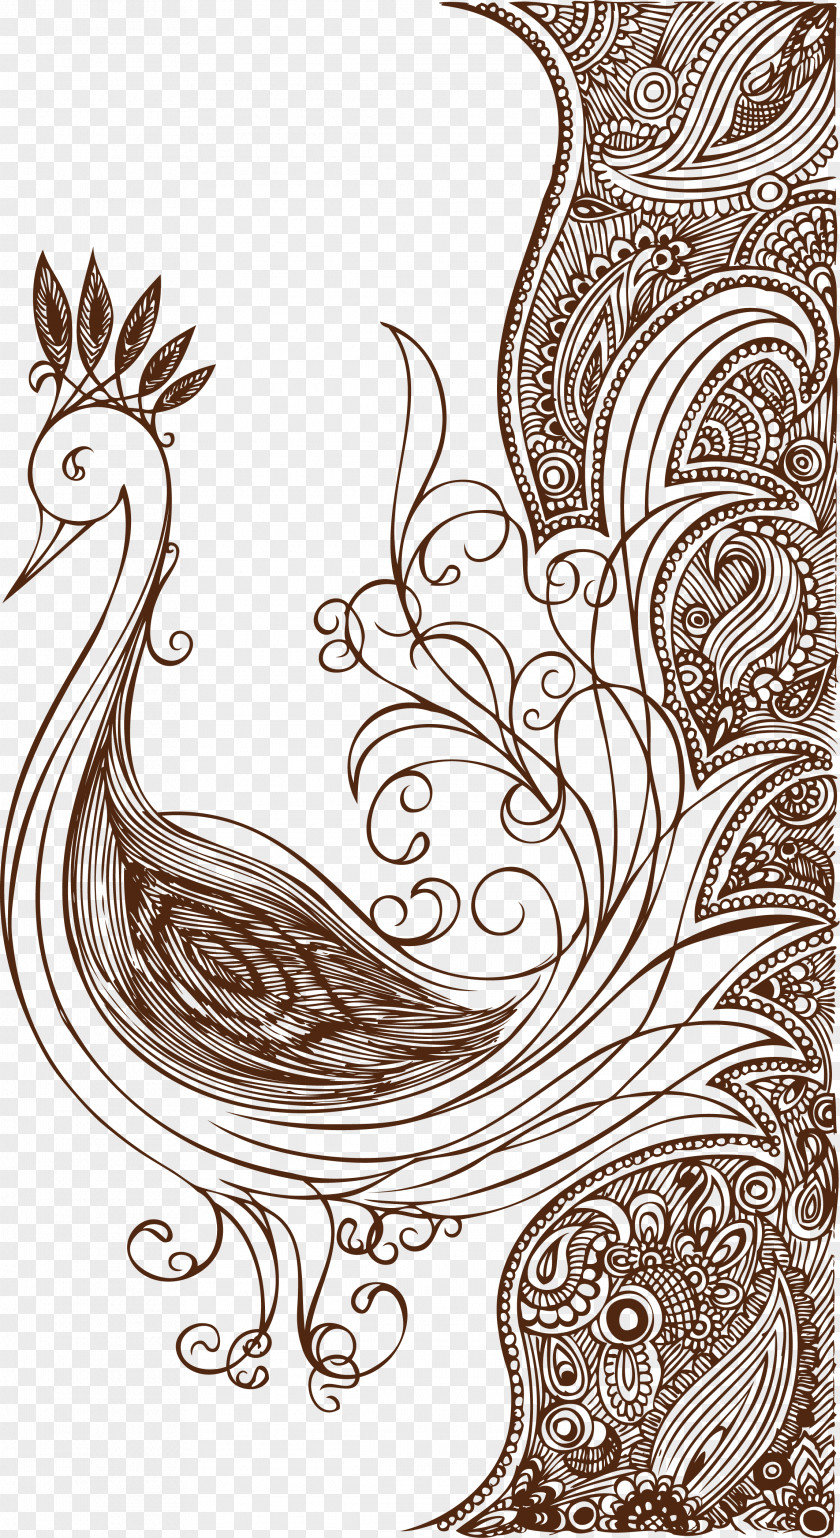 Peacock Drawing Floral Design Flower PNG